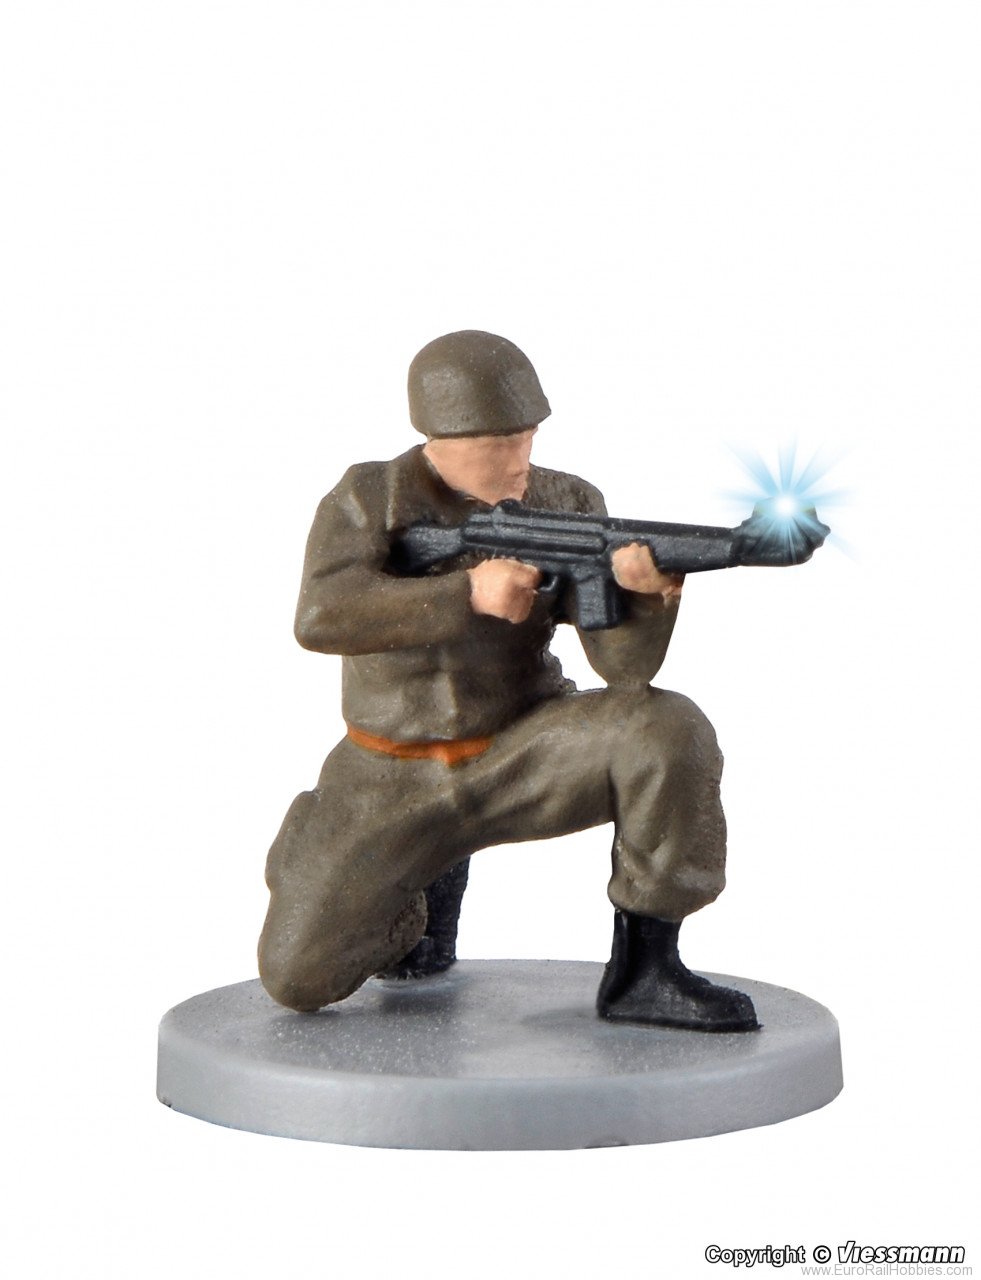 Viessmann 1531 HO Soldier, kneeling with gun and muzzle flas